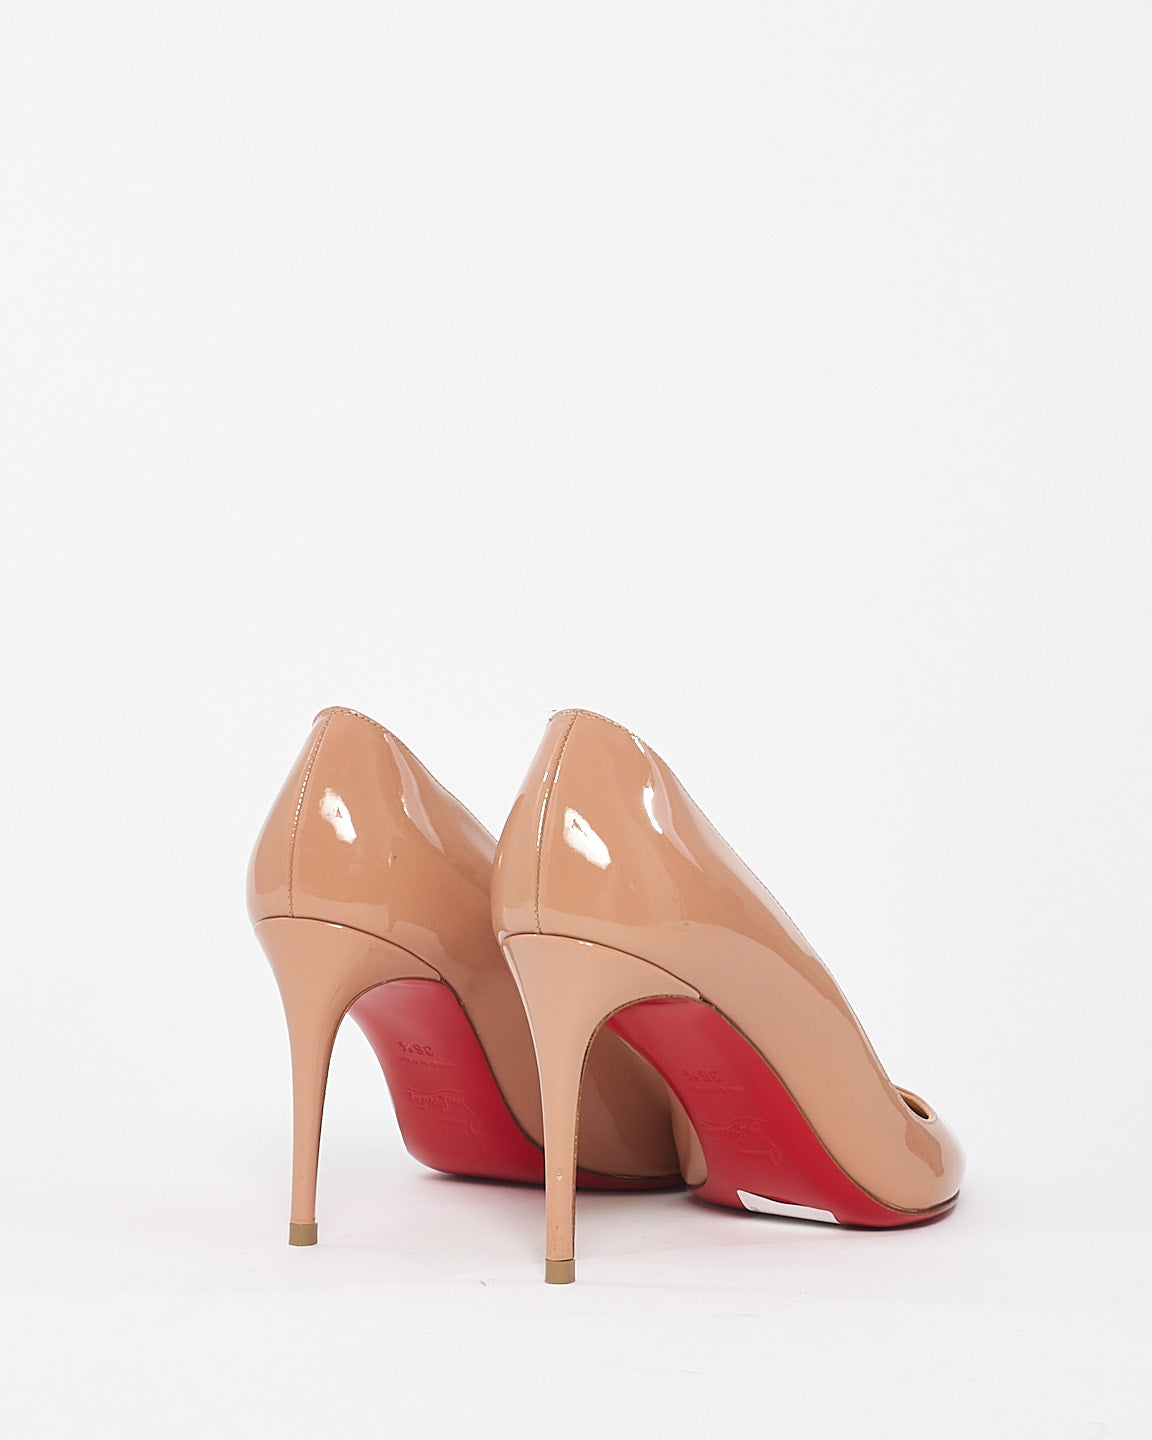 Christian Louboutin Beige Patent Leather Pigalle Pumps - 36.5